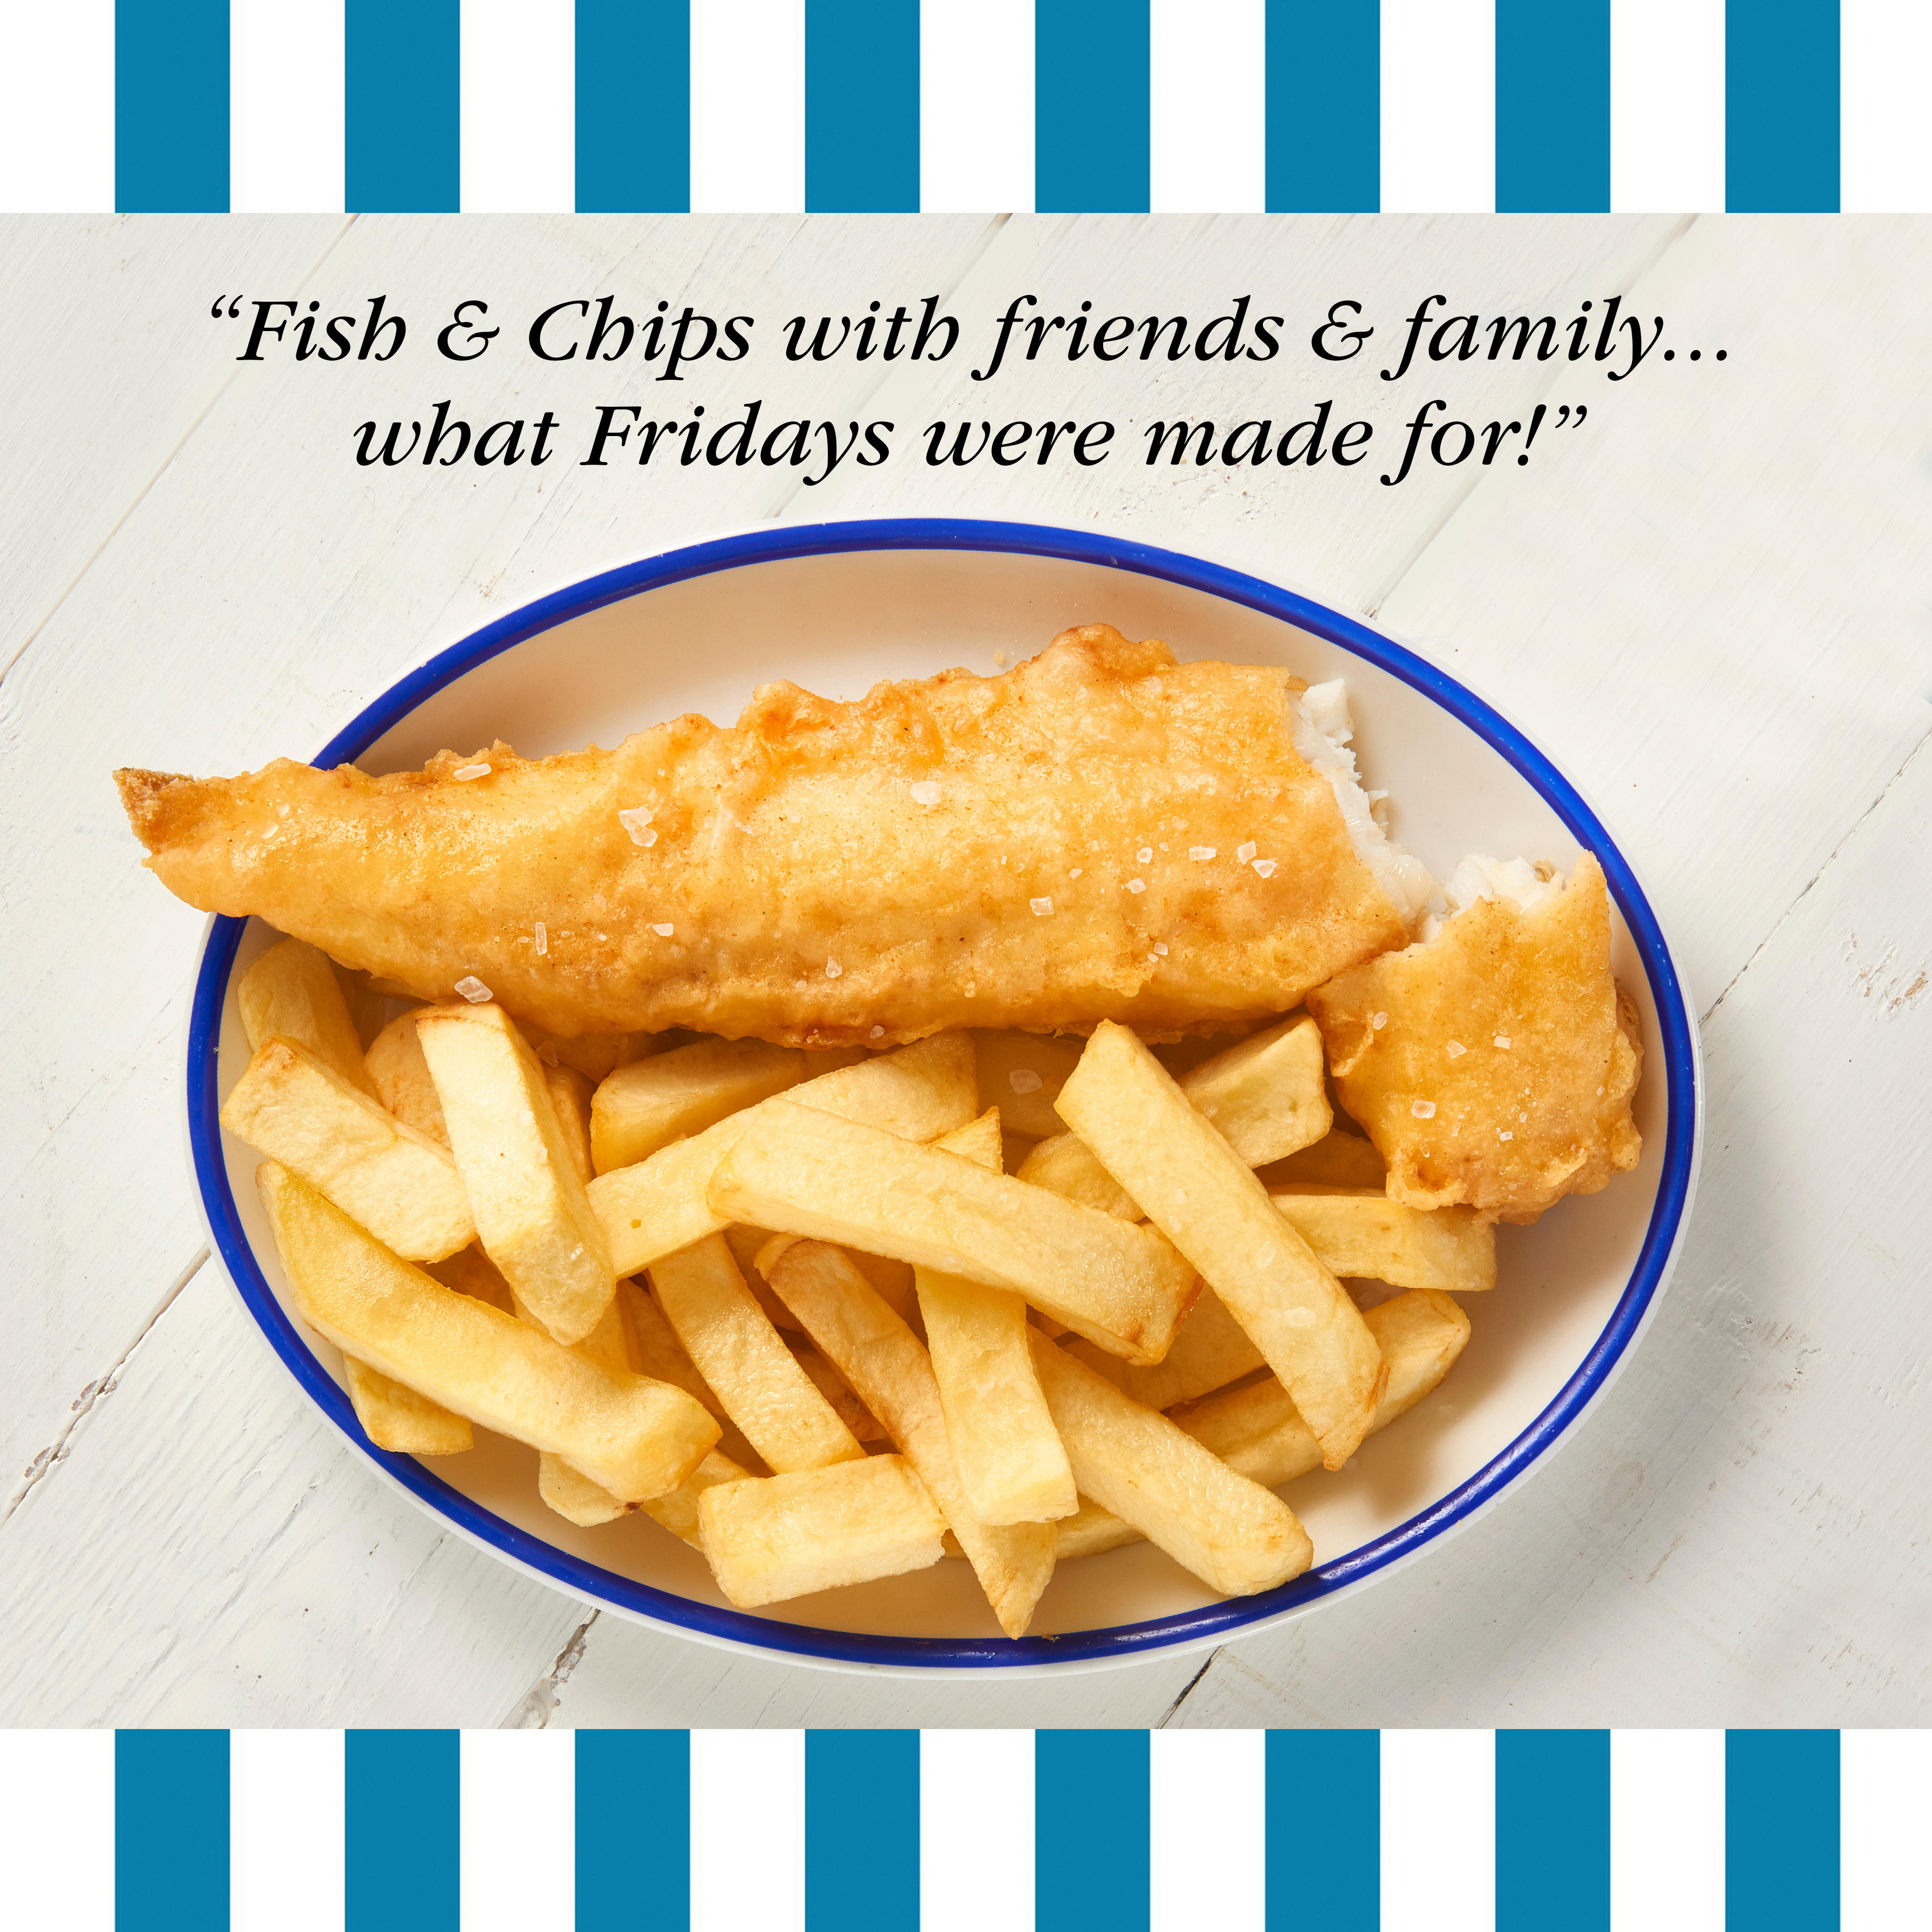 Churchill's Fish & Chips Didcot Didcot 01235 814385